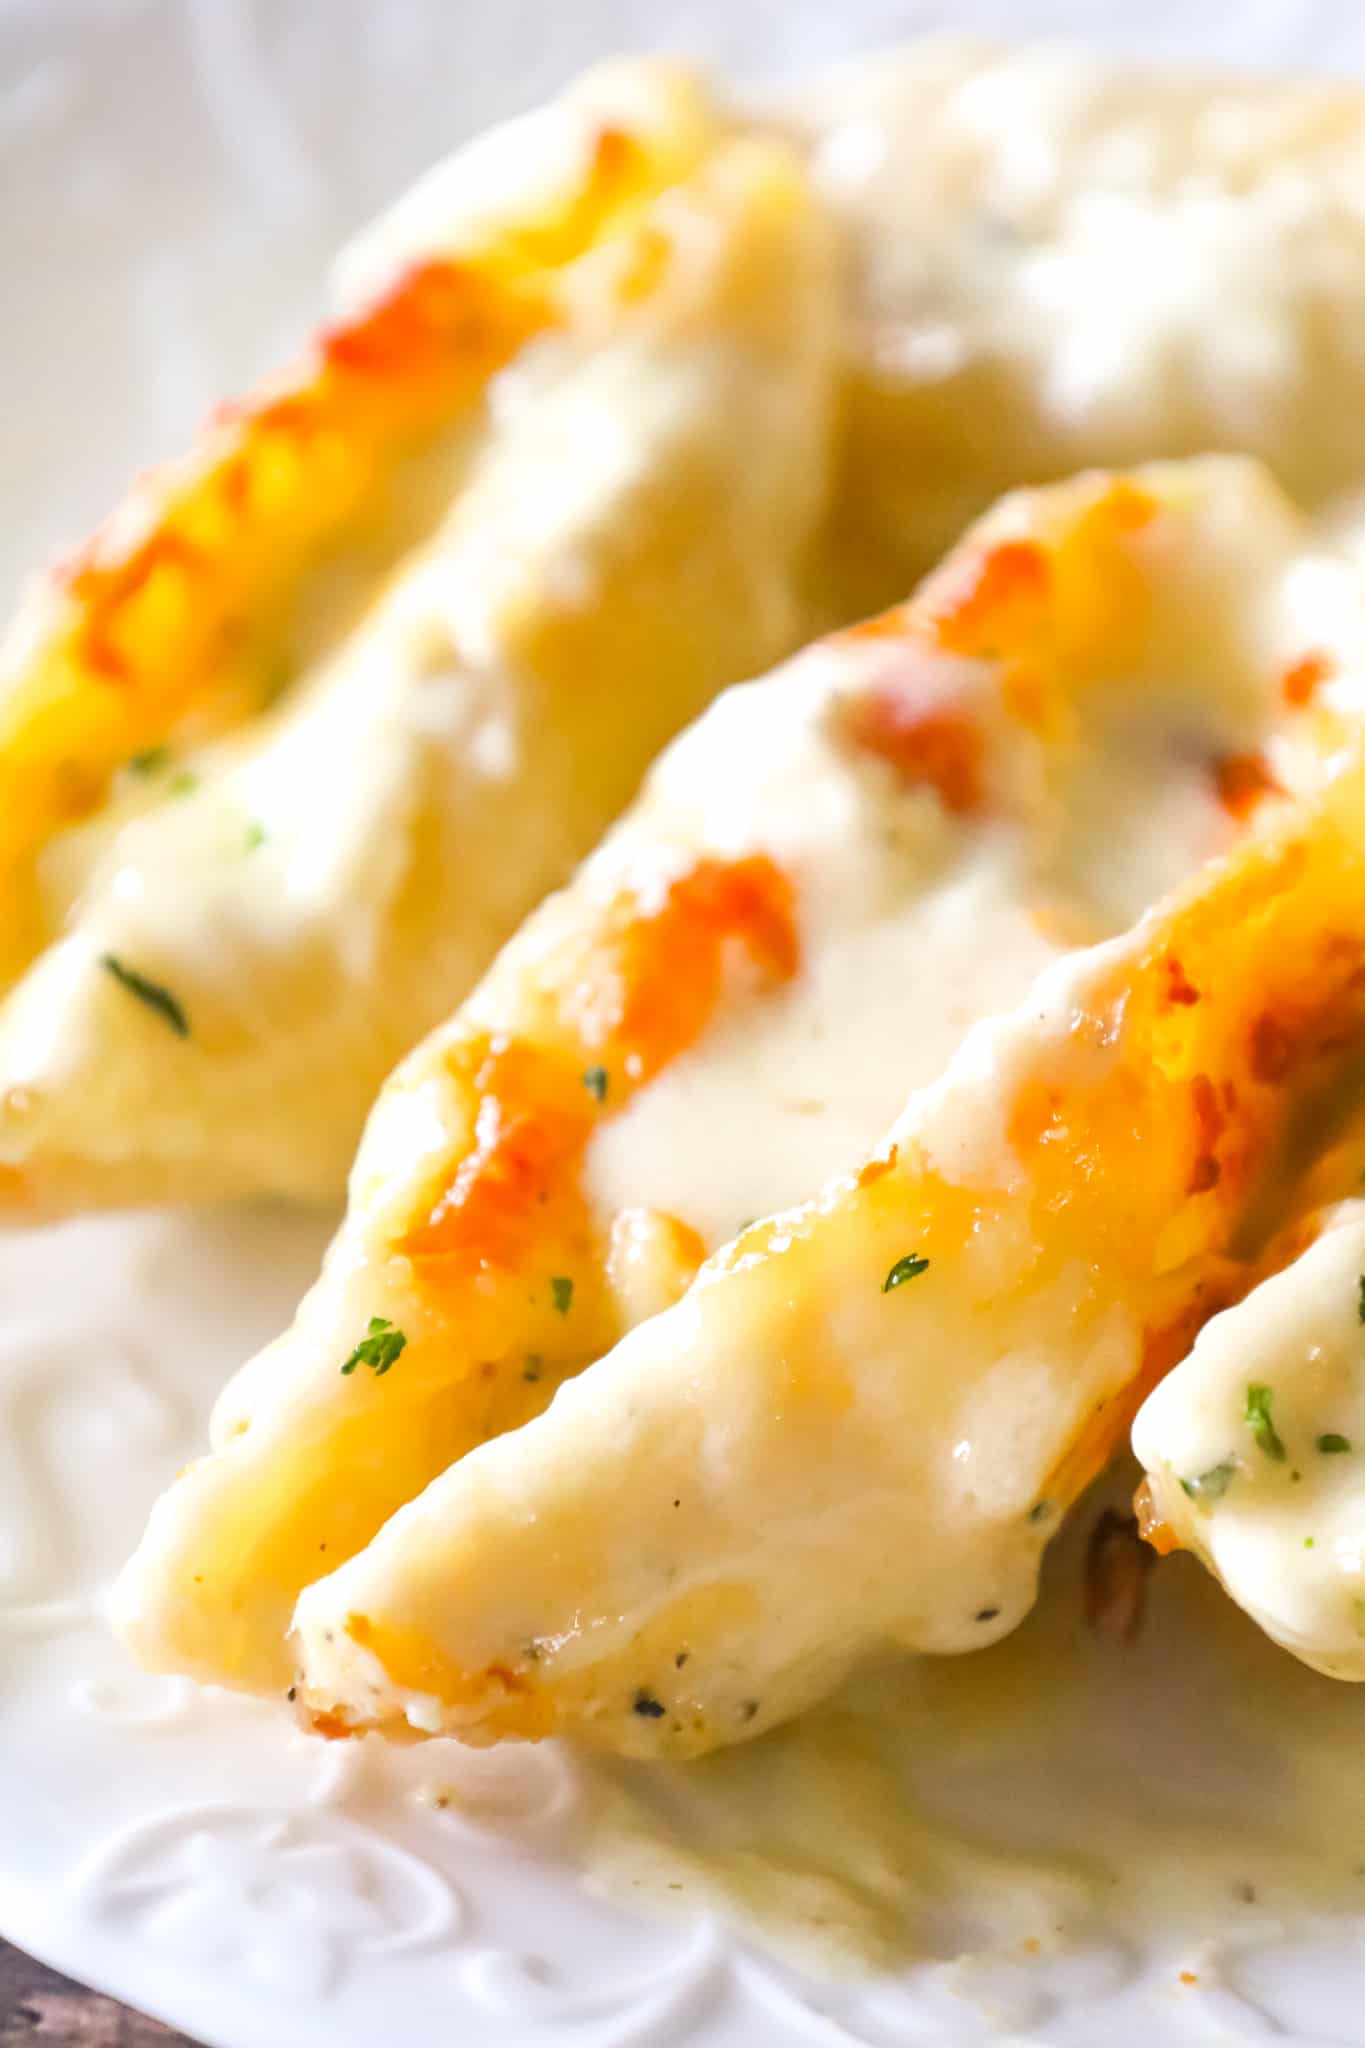 Chicken Alfredo Stuffed Shells are a delicious baked pasta recipe loaded with ricotta cheese, shredded chicken, mozzarella and parmesan all in a creamy garlic sauce.